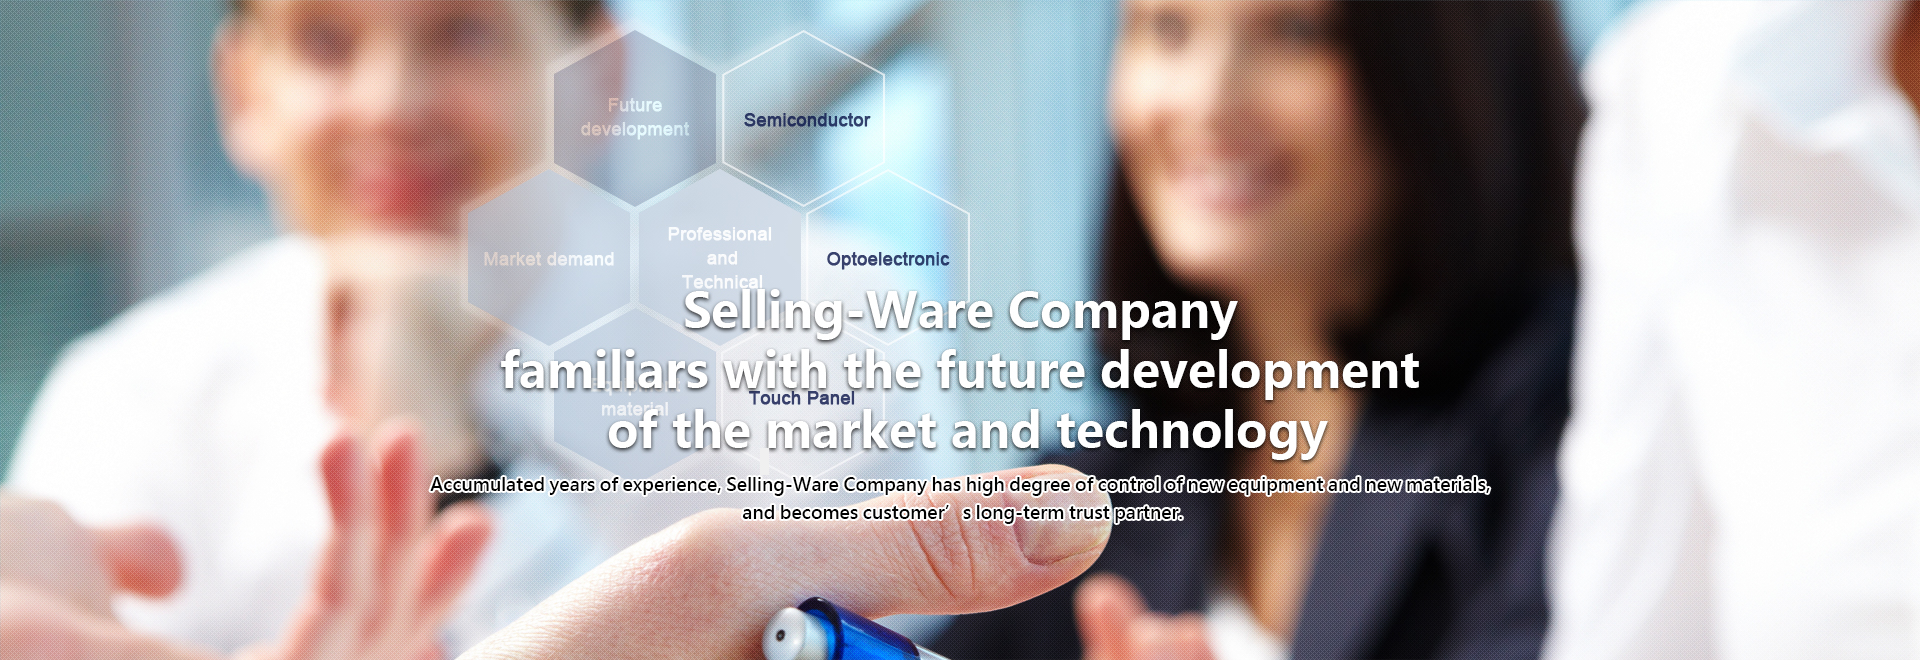 Selling-Ware Company familiars with the future development of the market and technology. Accumulated years of experience, Selling-Ware Company has high degree of control of new equipment and new materials, and becomes customer’s long-term trust partner.